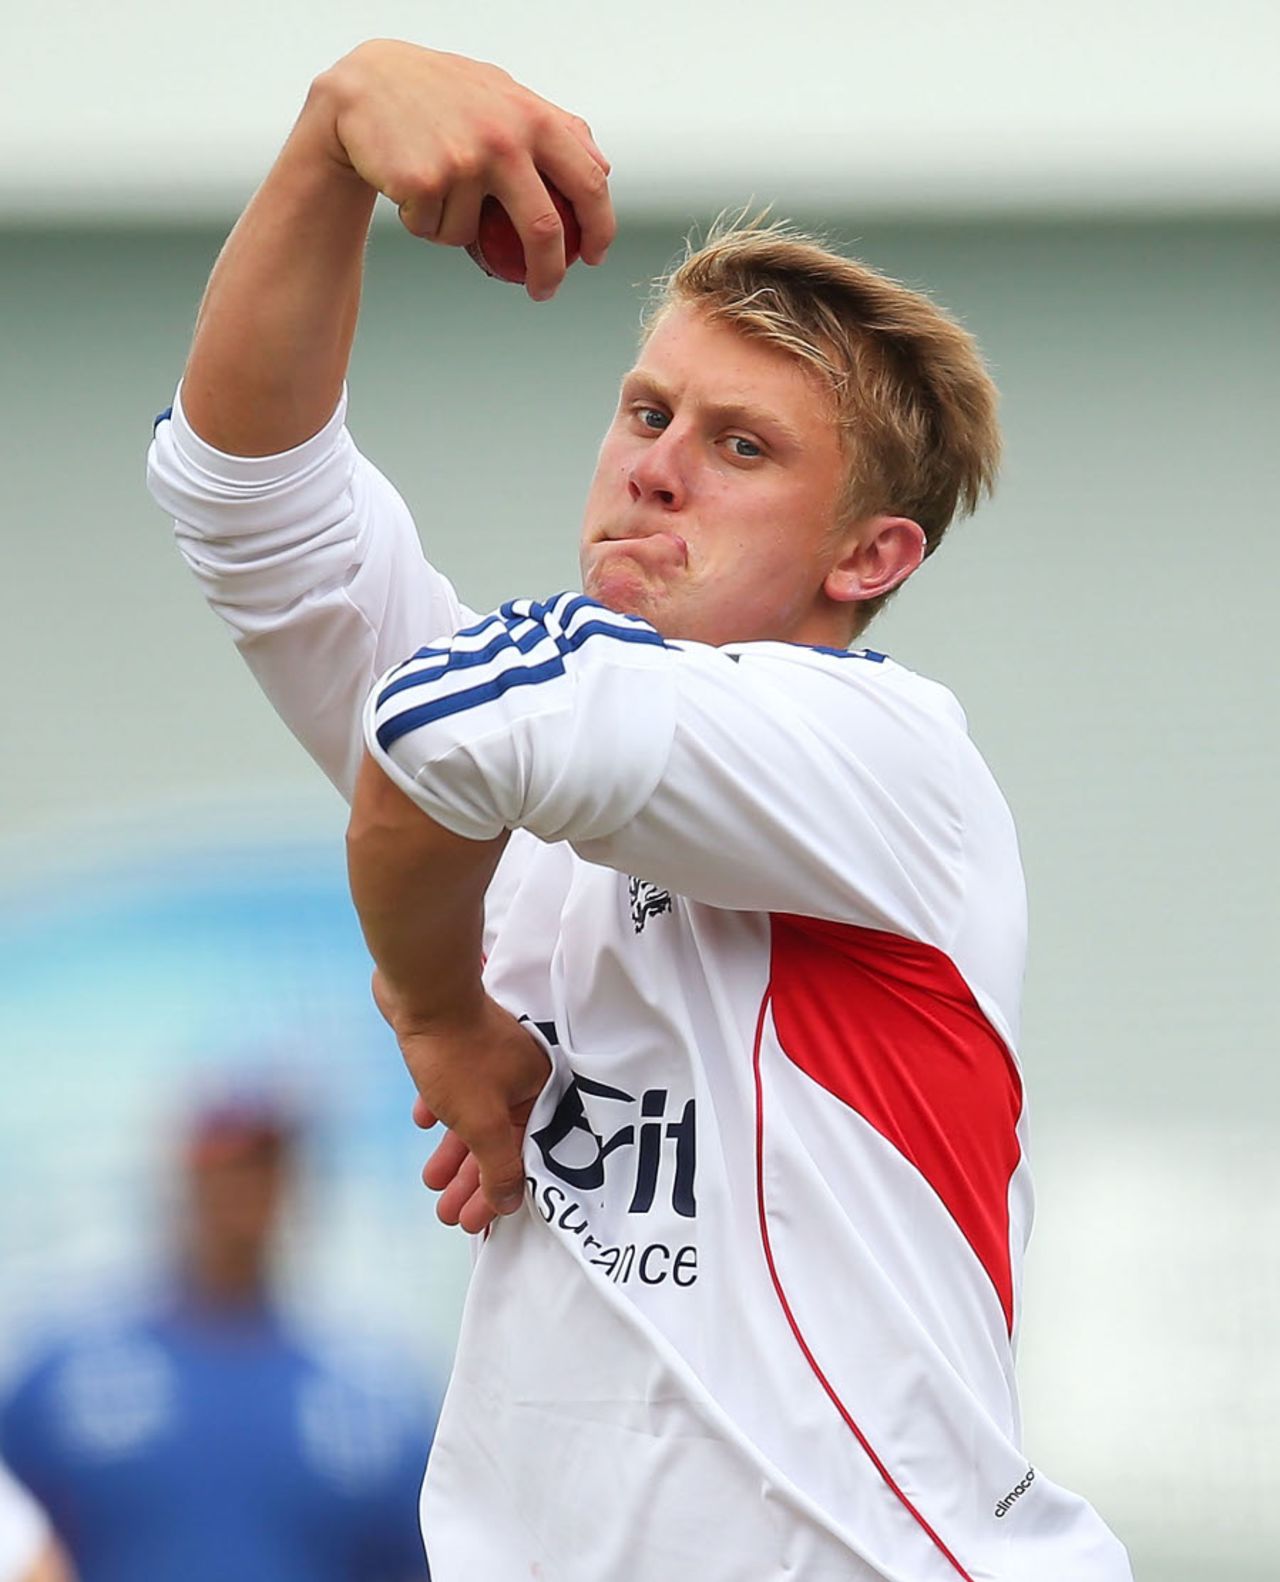 Scott Borthwick is expected to make his Test debut, Sydney, January 2, 2014